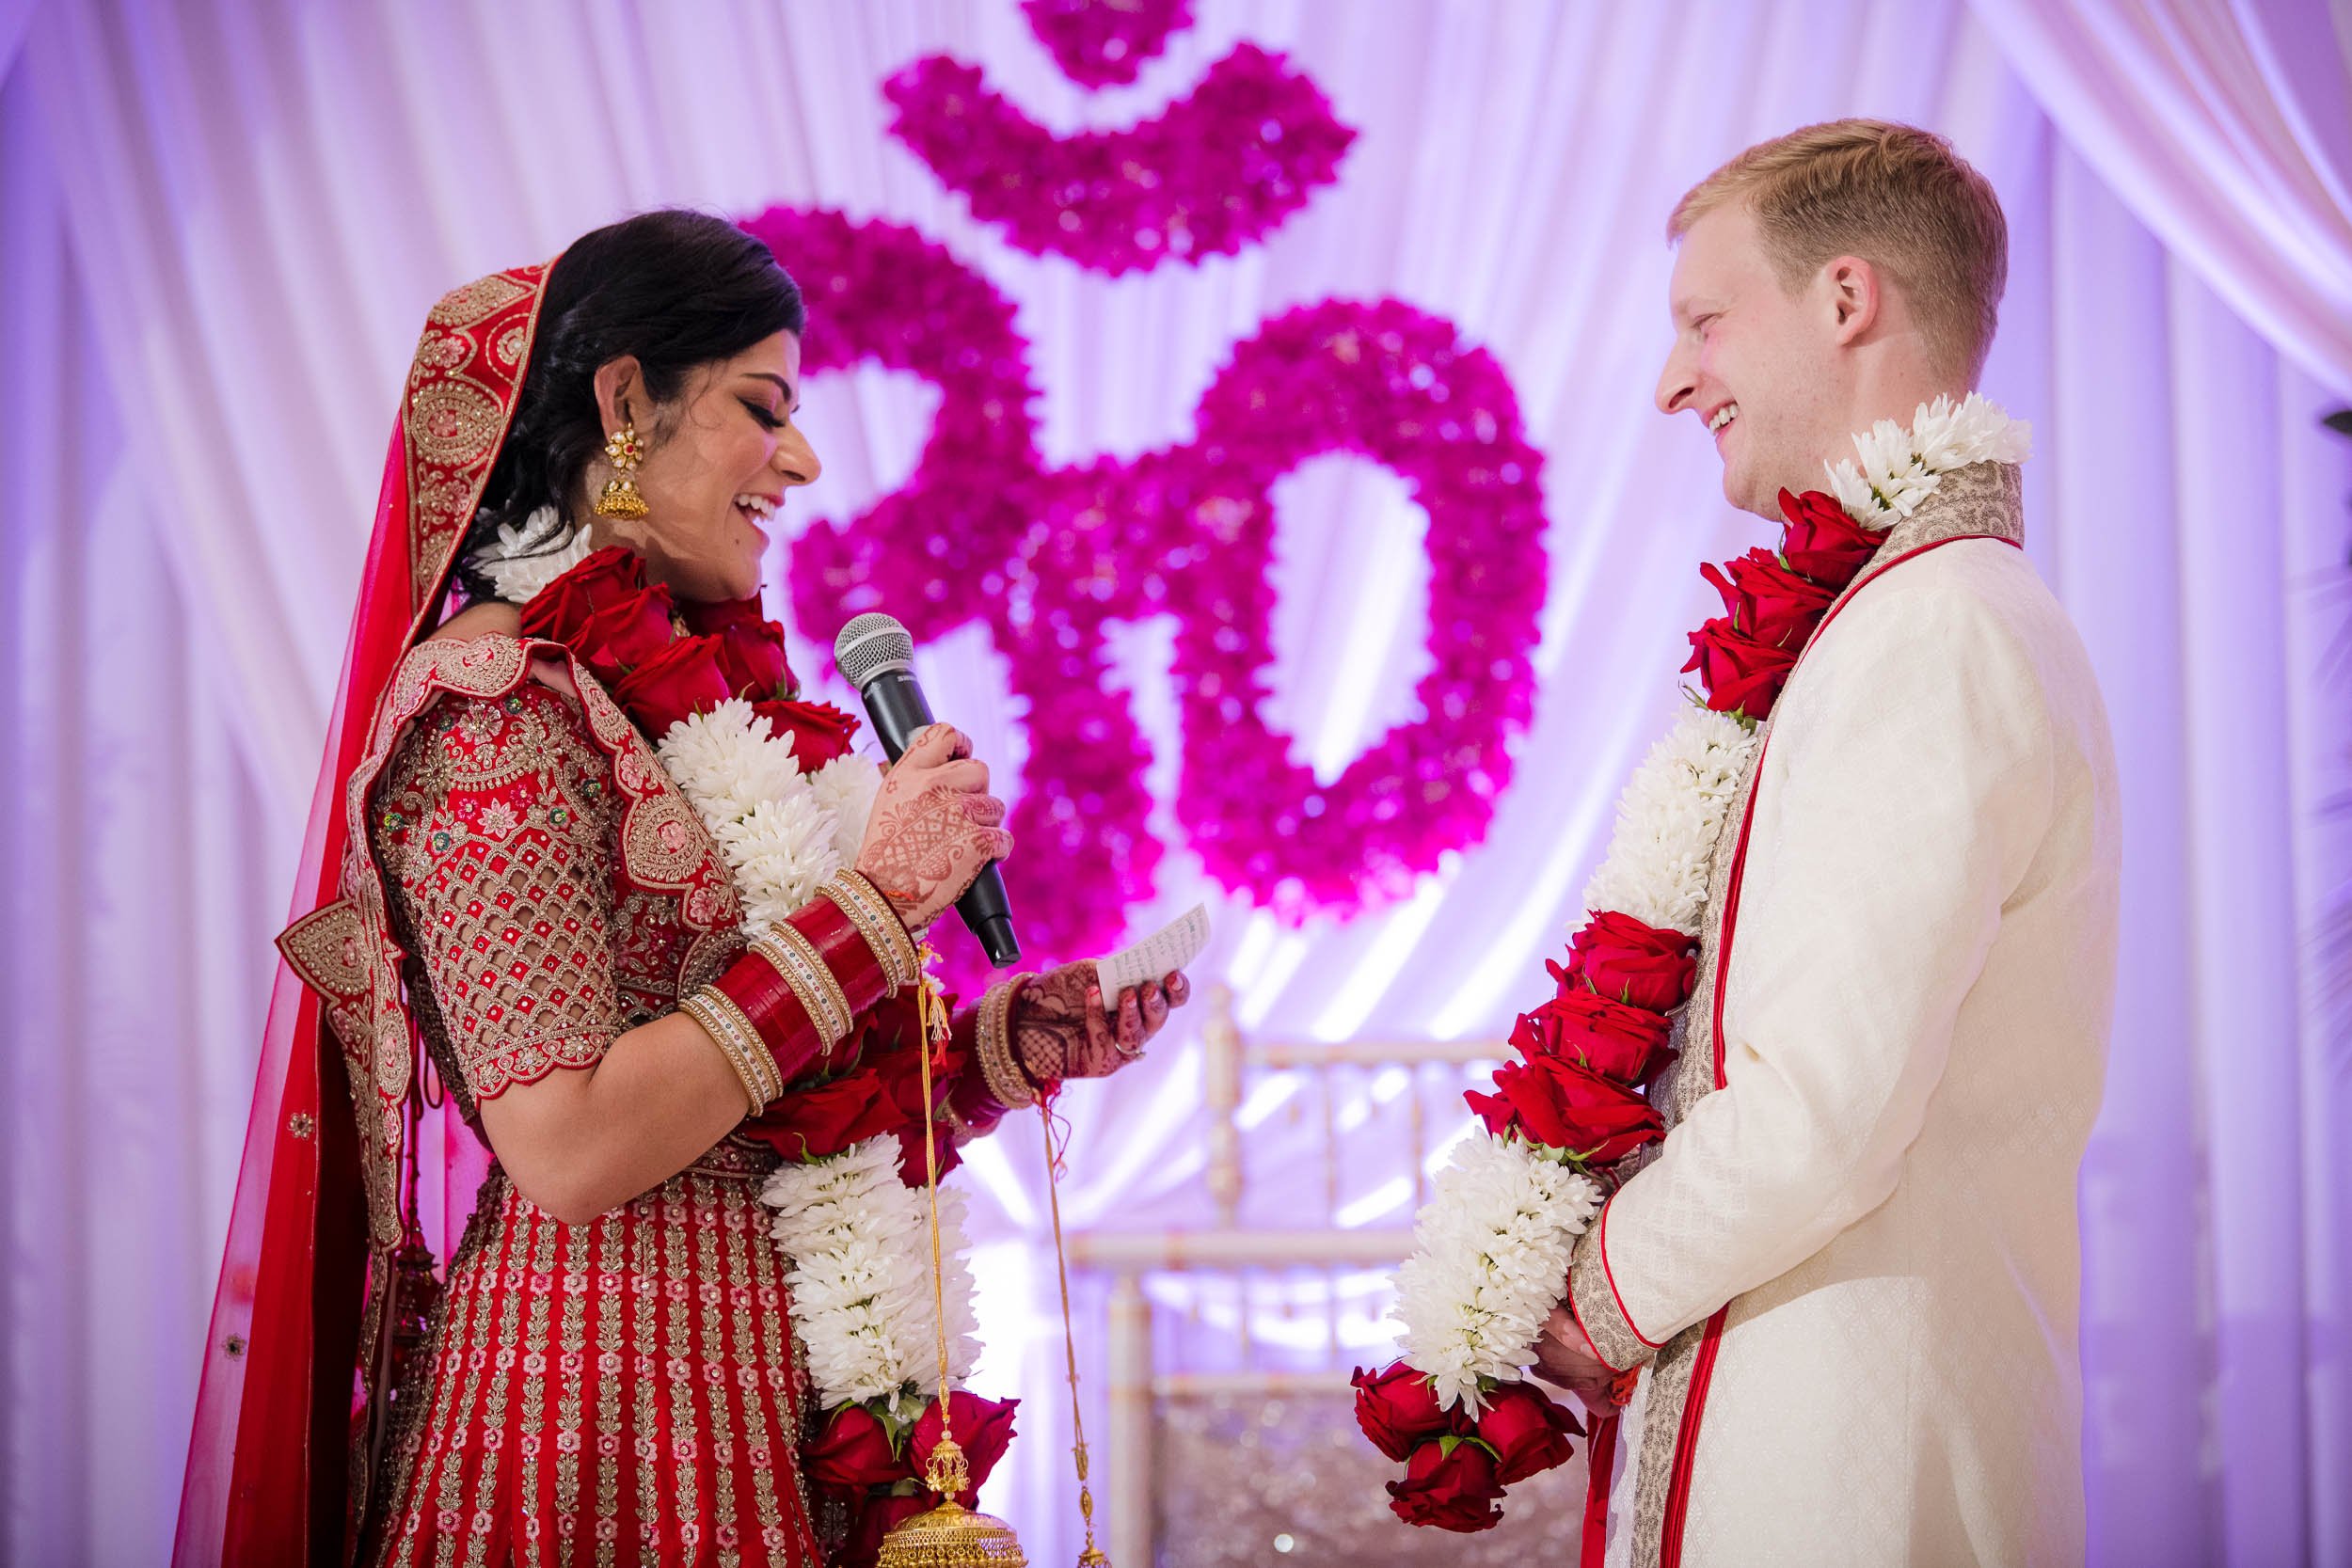 Indian Wedding Photographers | Renaissance Schaumburg | J. Brown Photography | bride and groom exchange vows during ceremony.